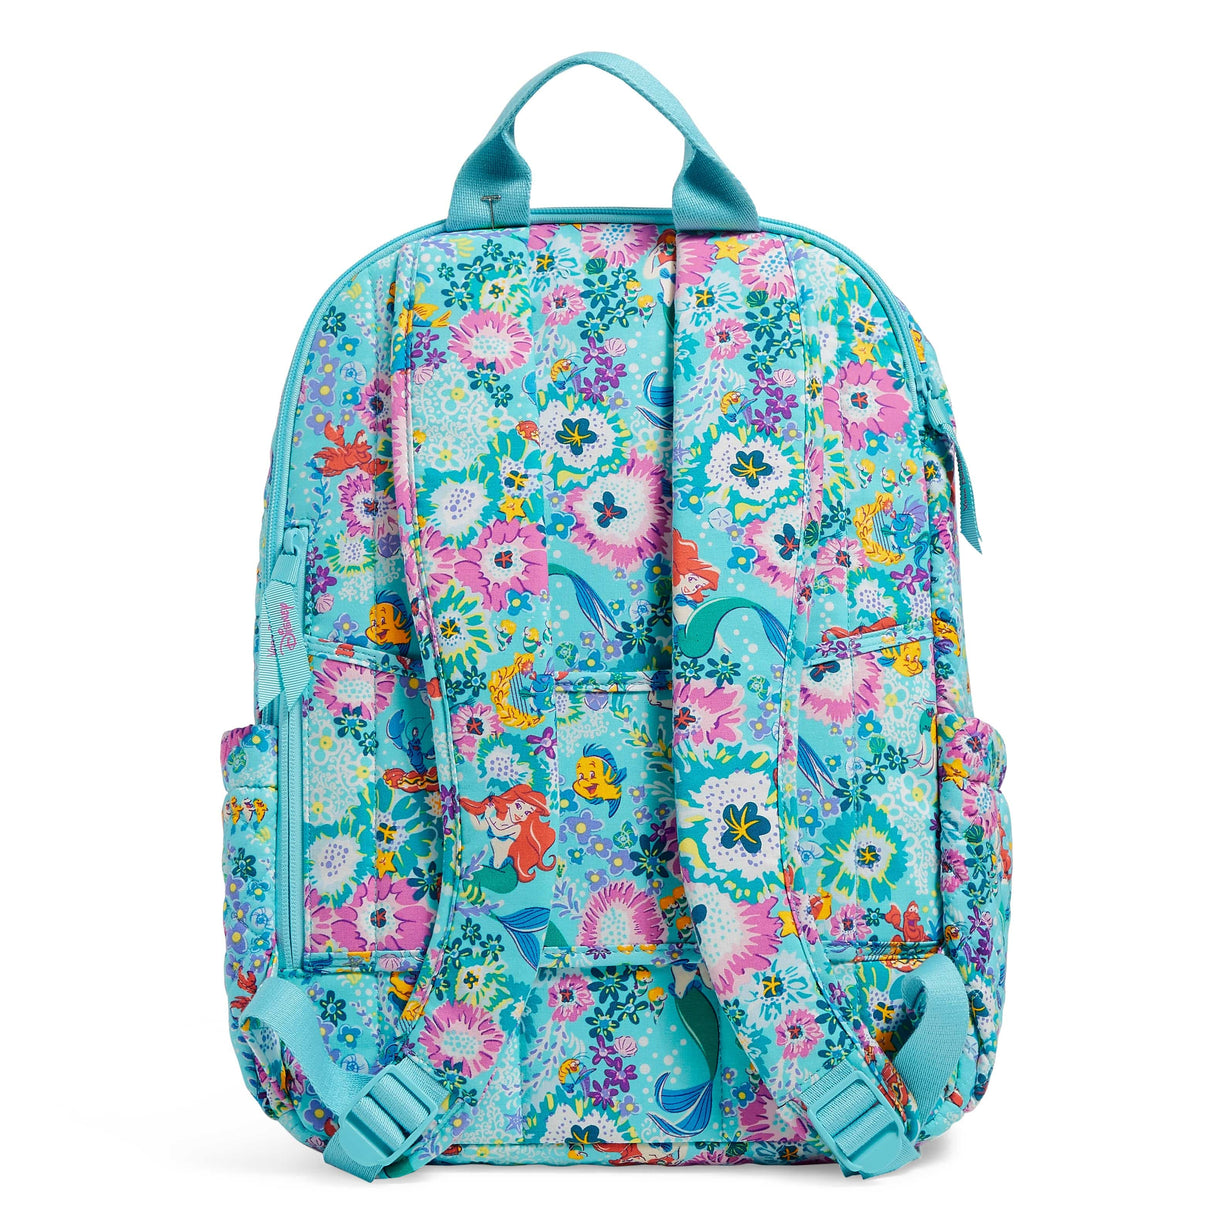 Money Saver: Check out this exclusive deal for Vera Bradley fans